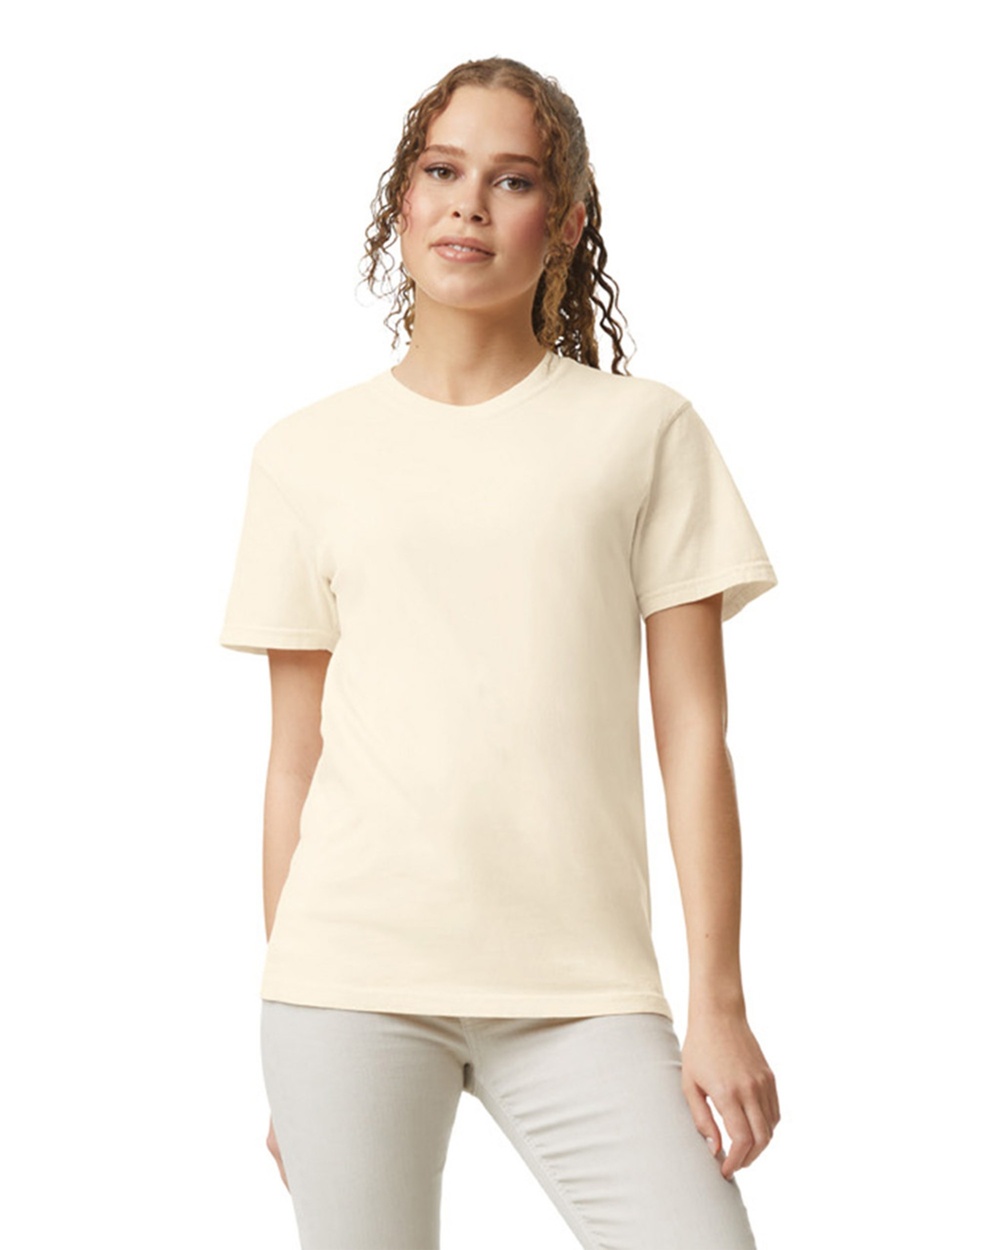 Comfort Colors - Garment-Dyed Heavyweight T-Shirt - 1717 - Ivory - Size: M  